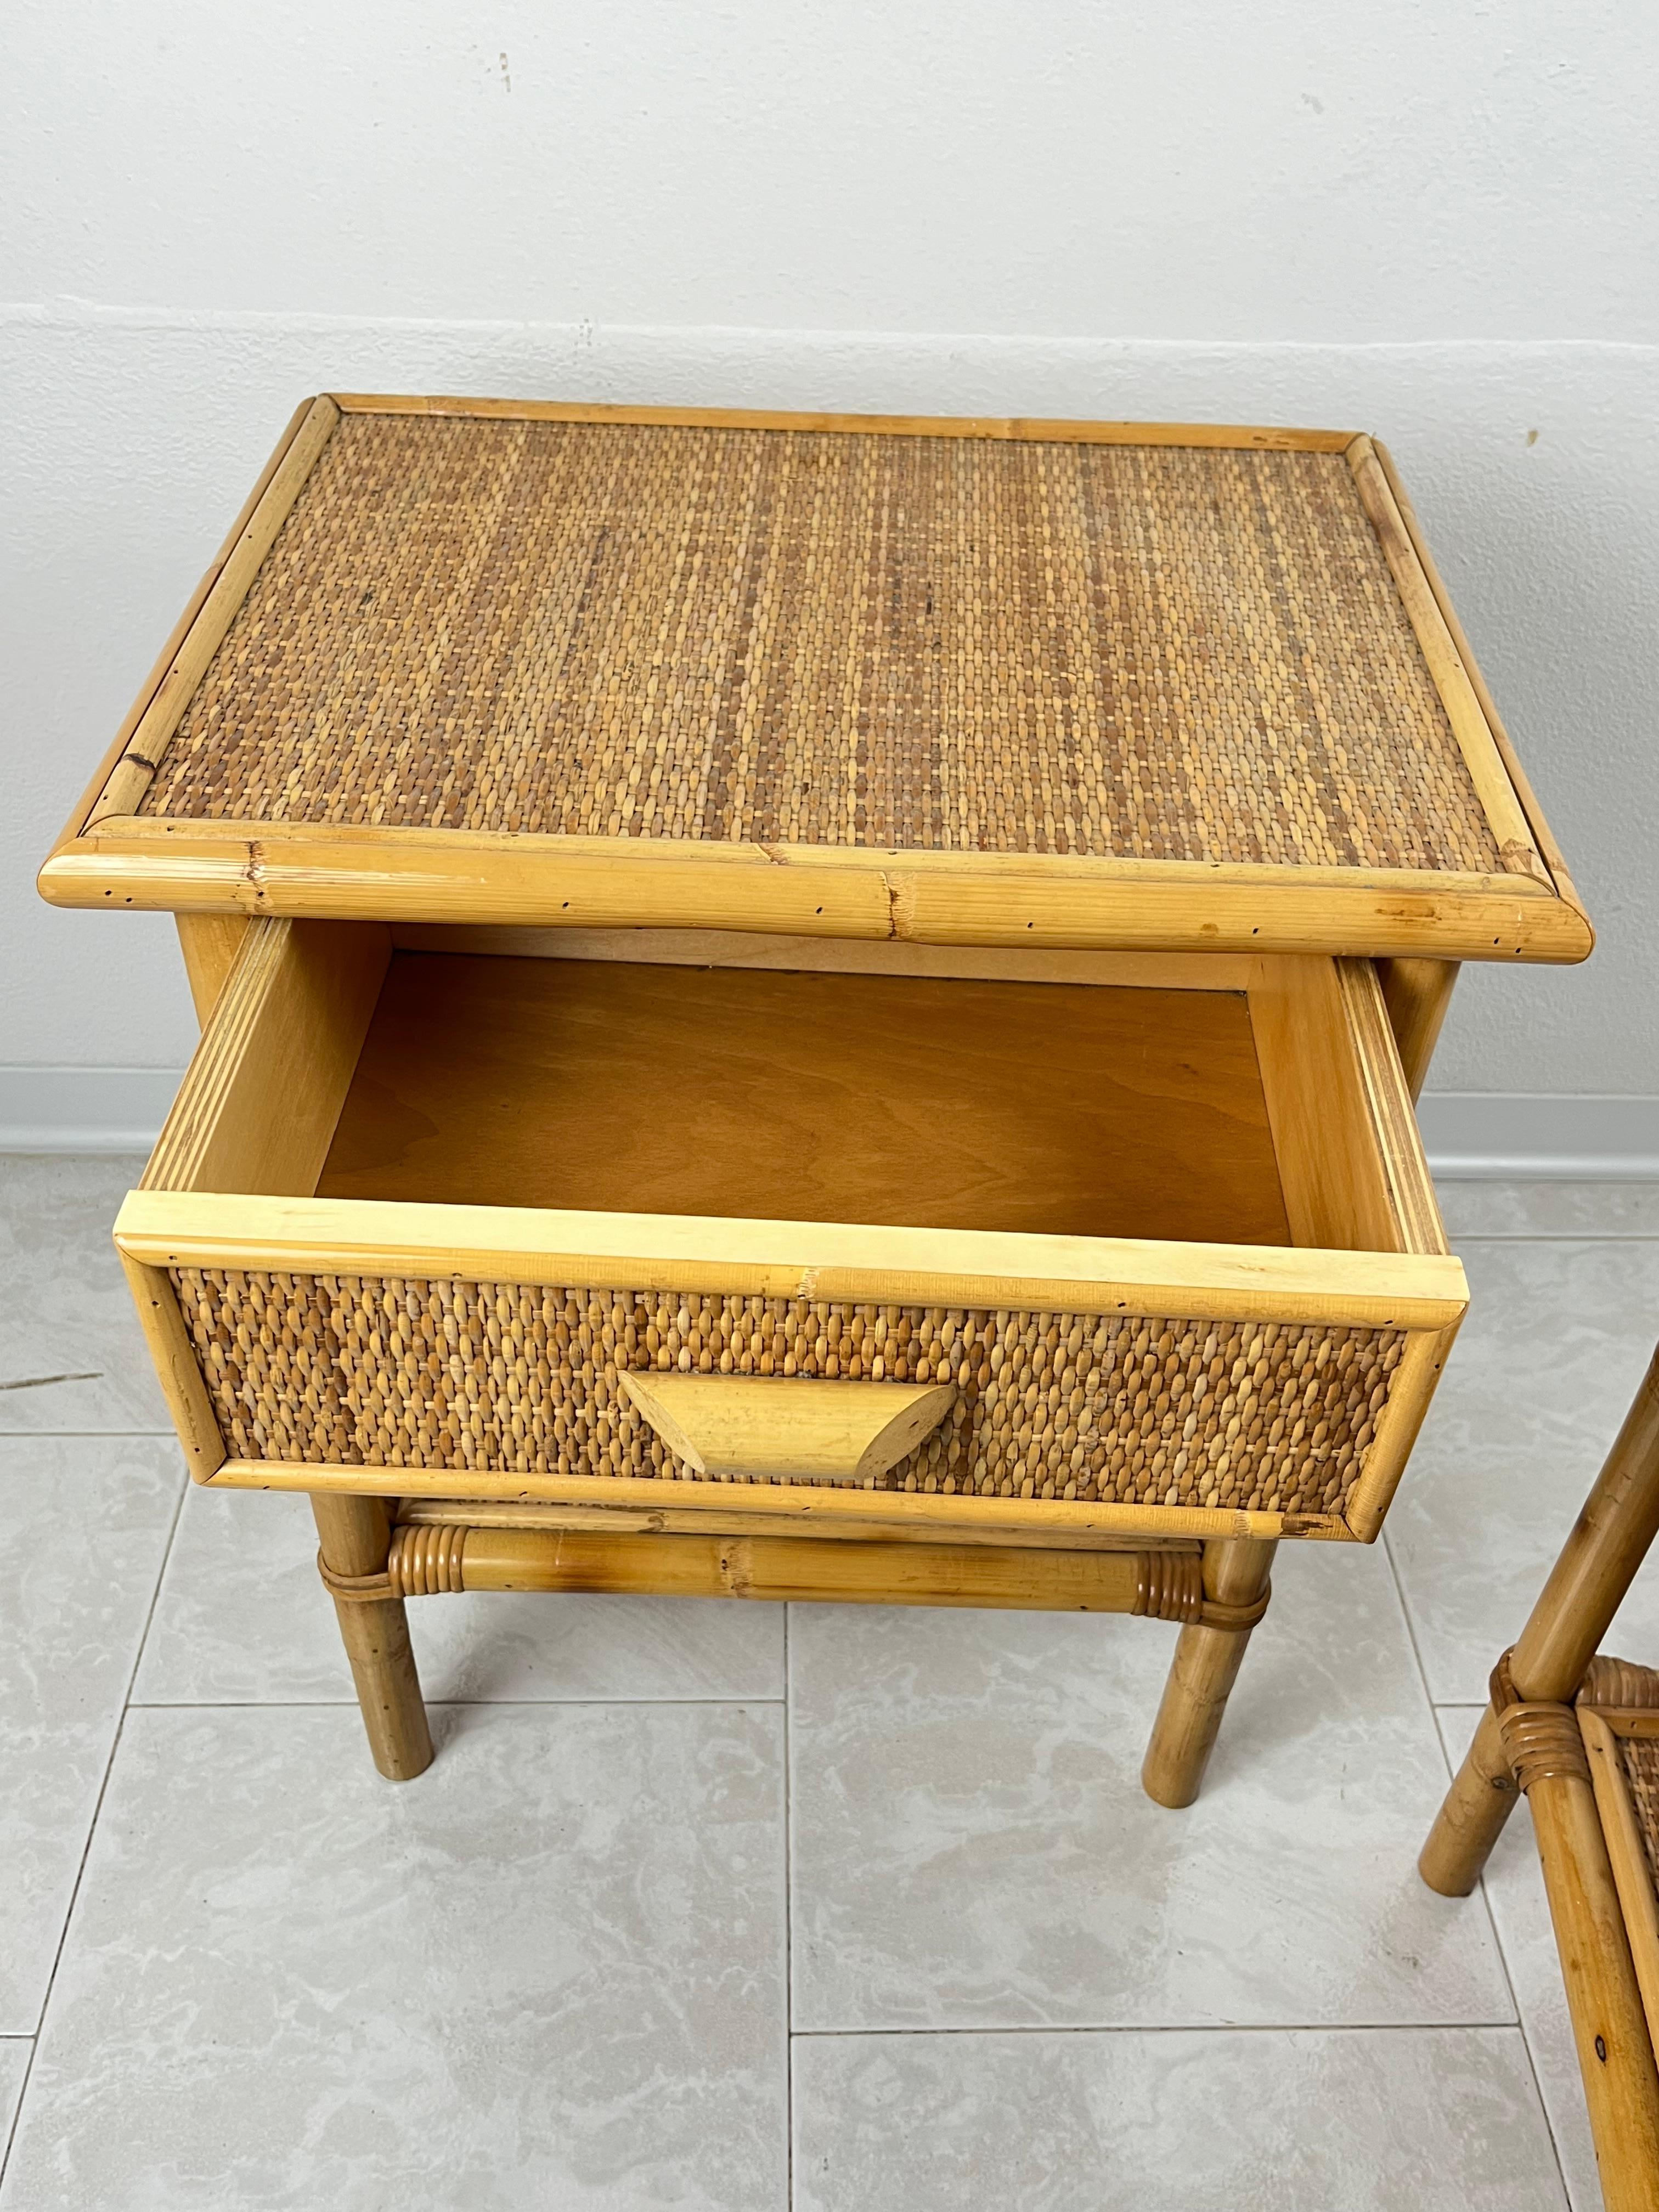 Set of 2 Mid-Century French Riviera Wicker And Rattan Bedside Tables 1960s For Sale 2